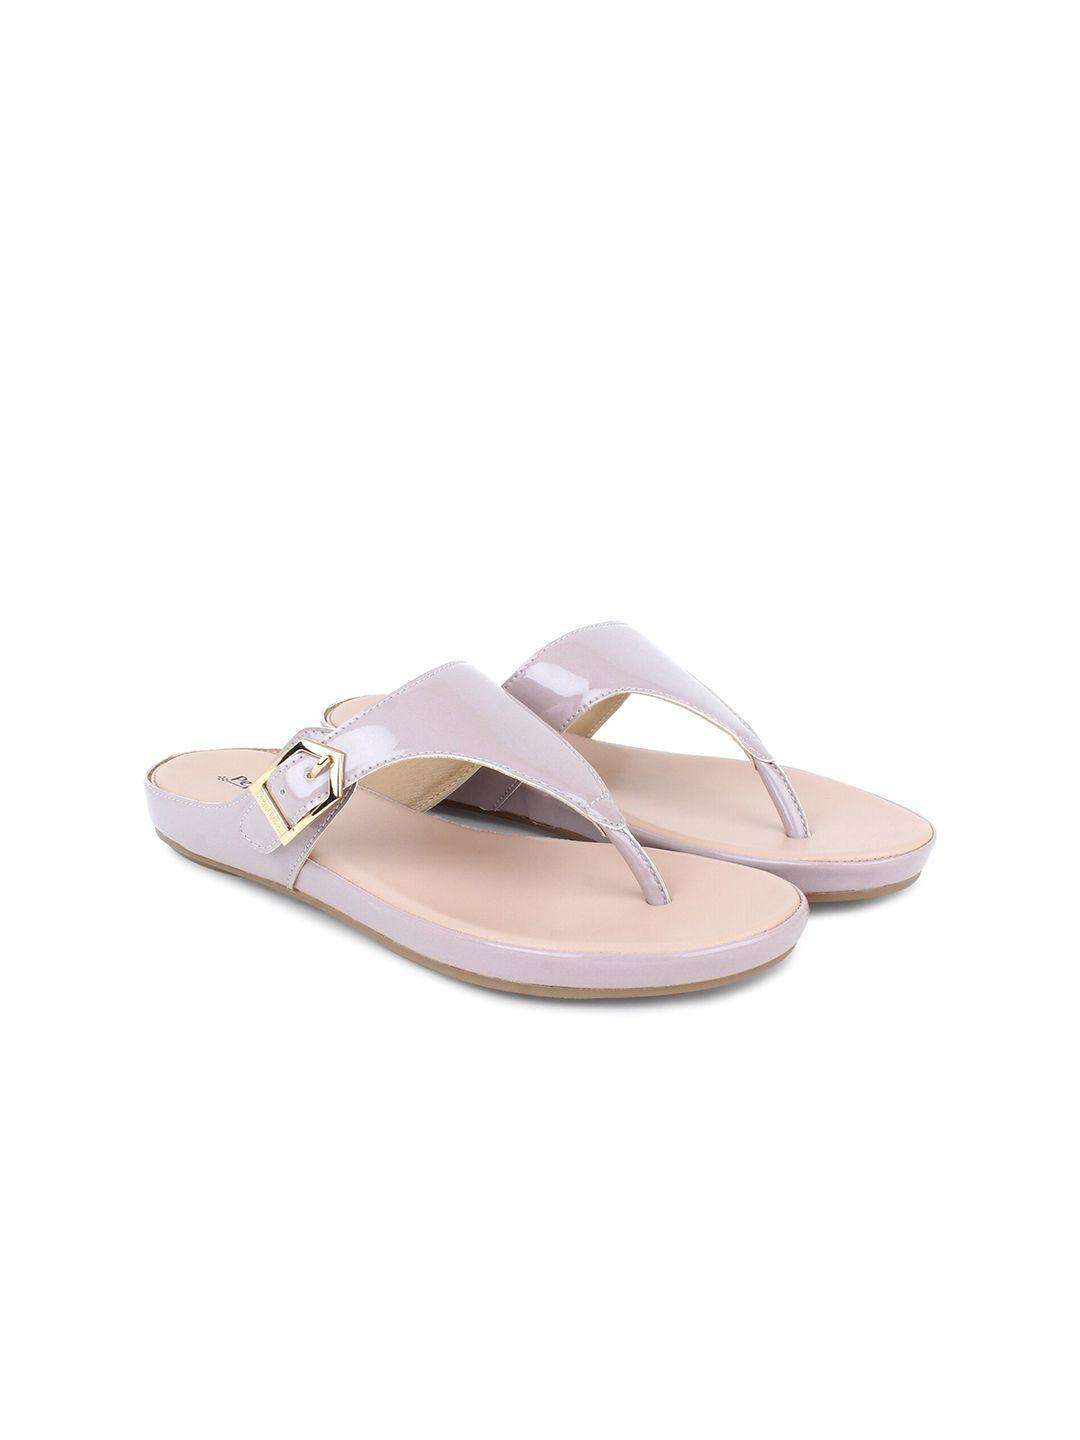 pepitoes buckled t-strap flats